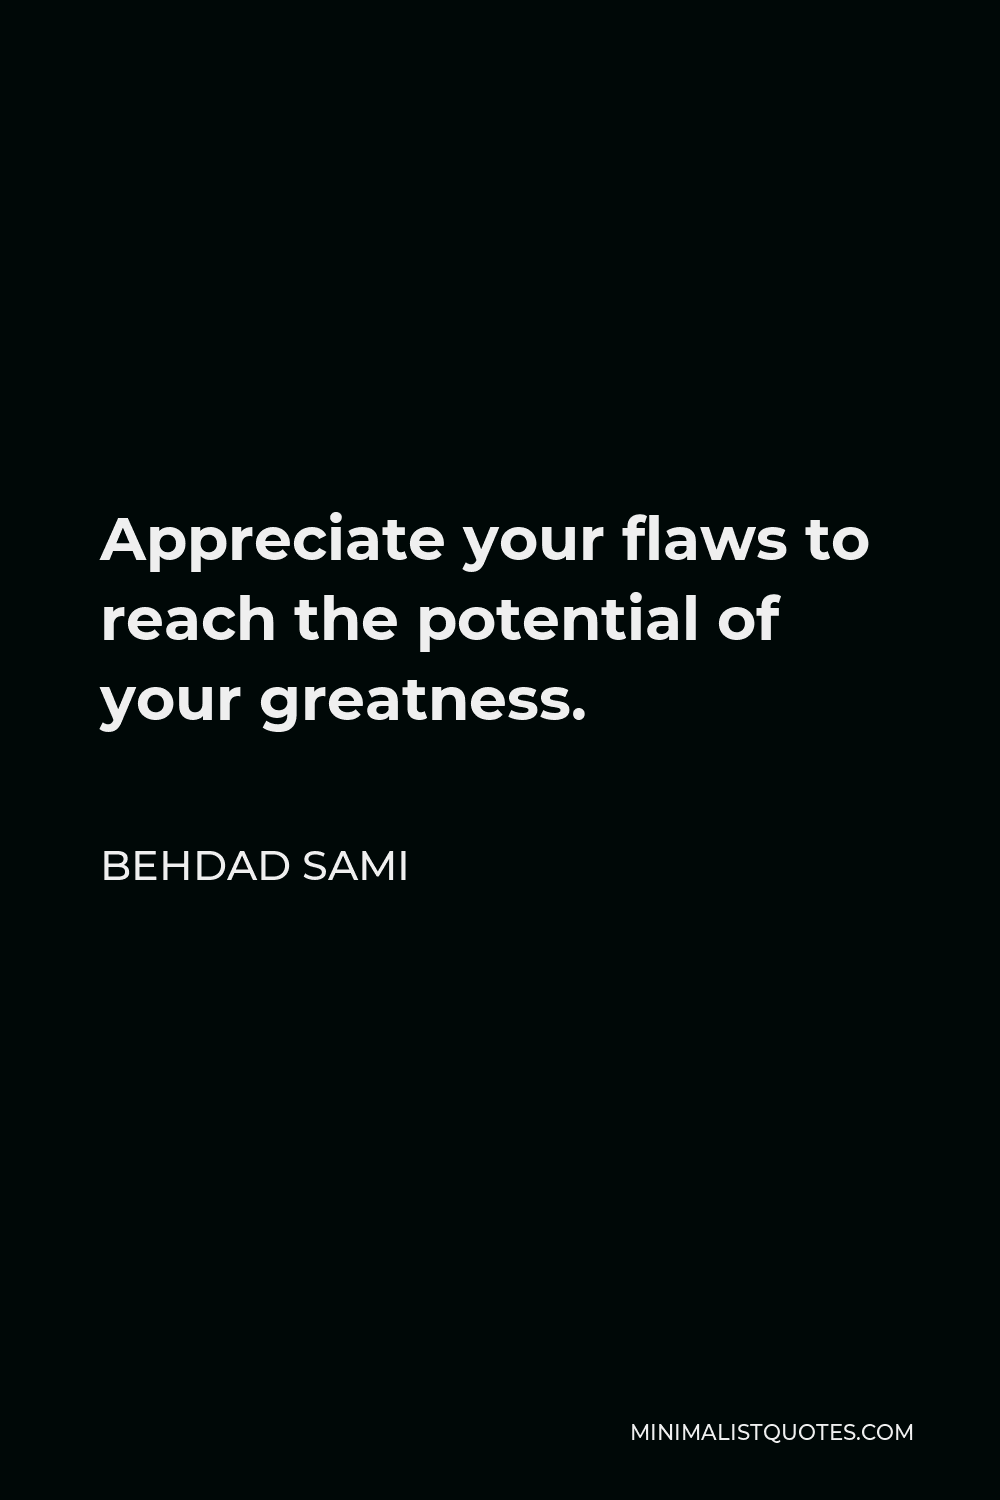 Behdad Sami Quote - Appreciate your flaws to reach the potential of your greatness.